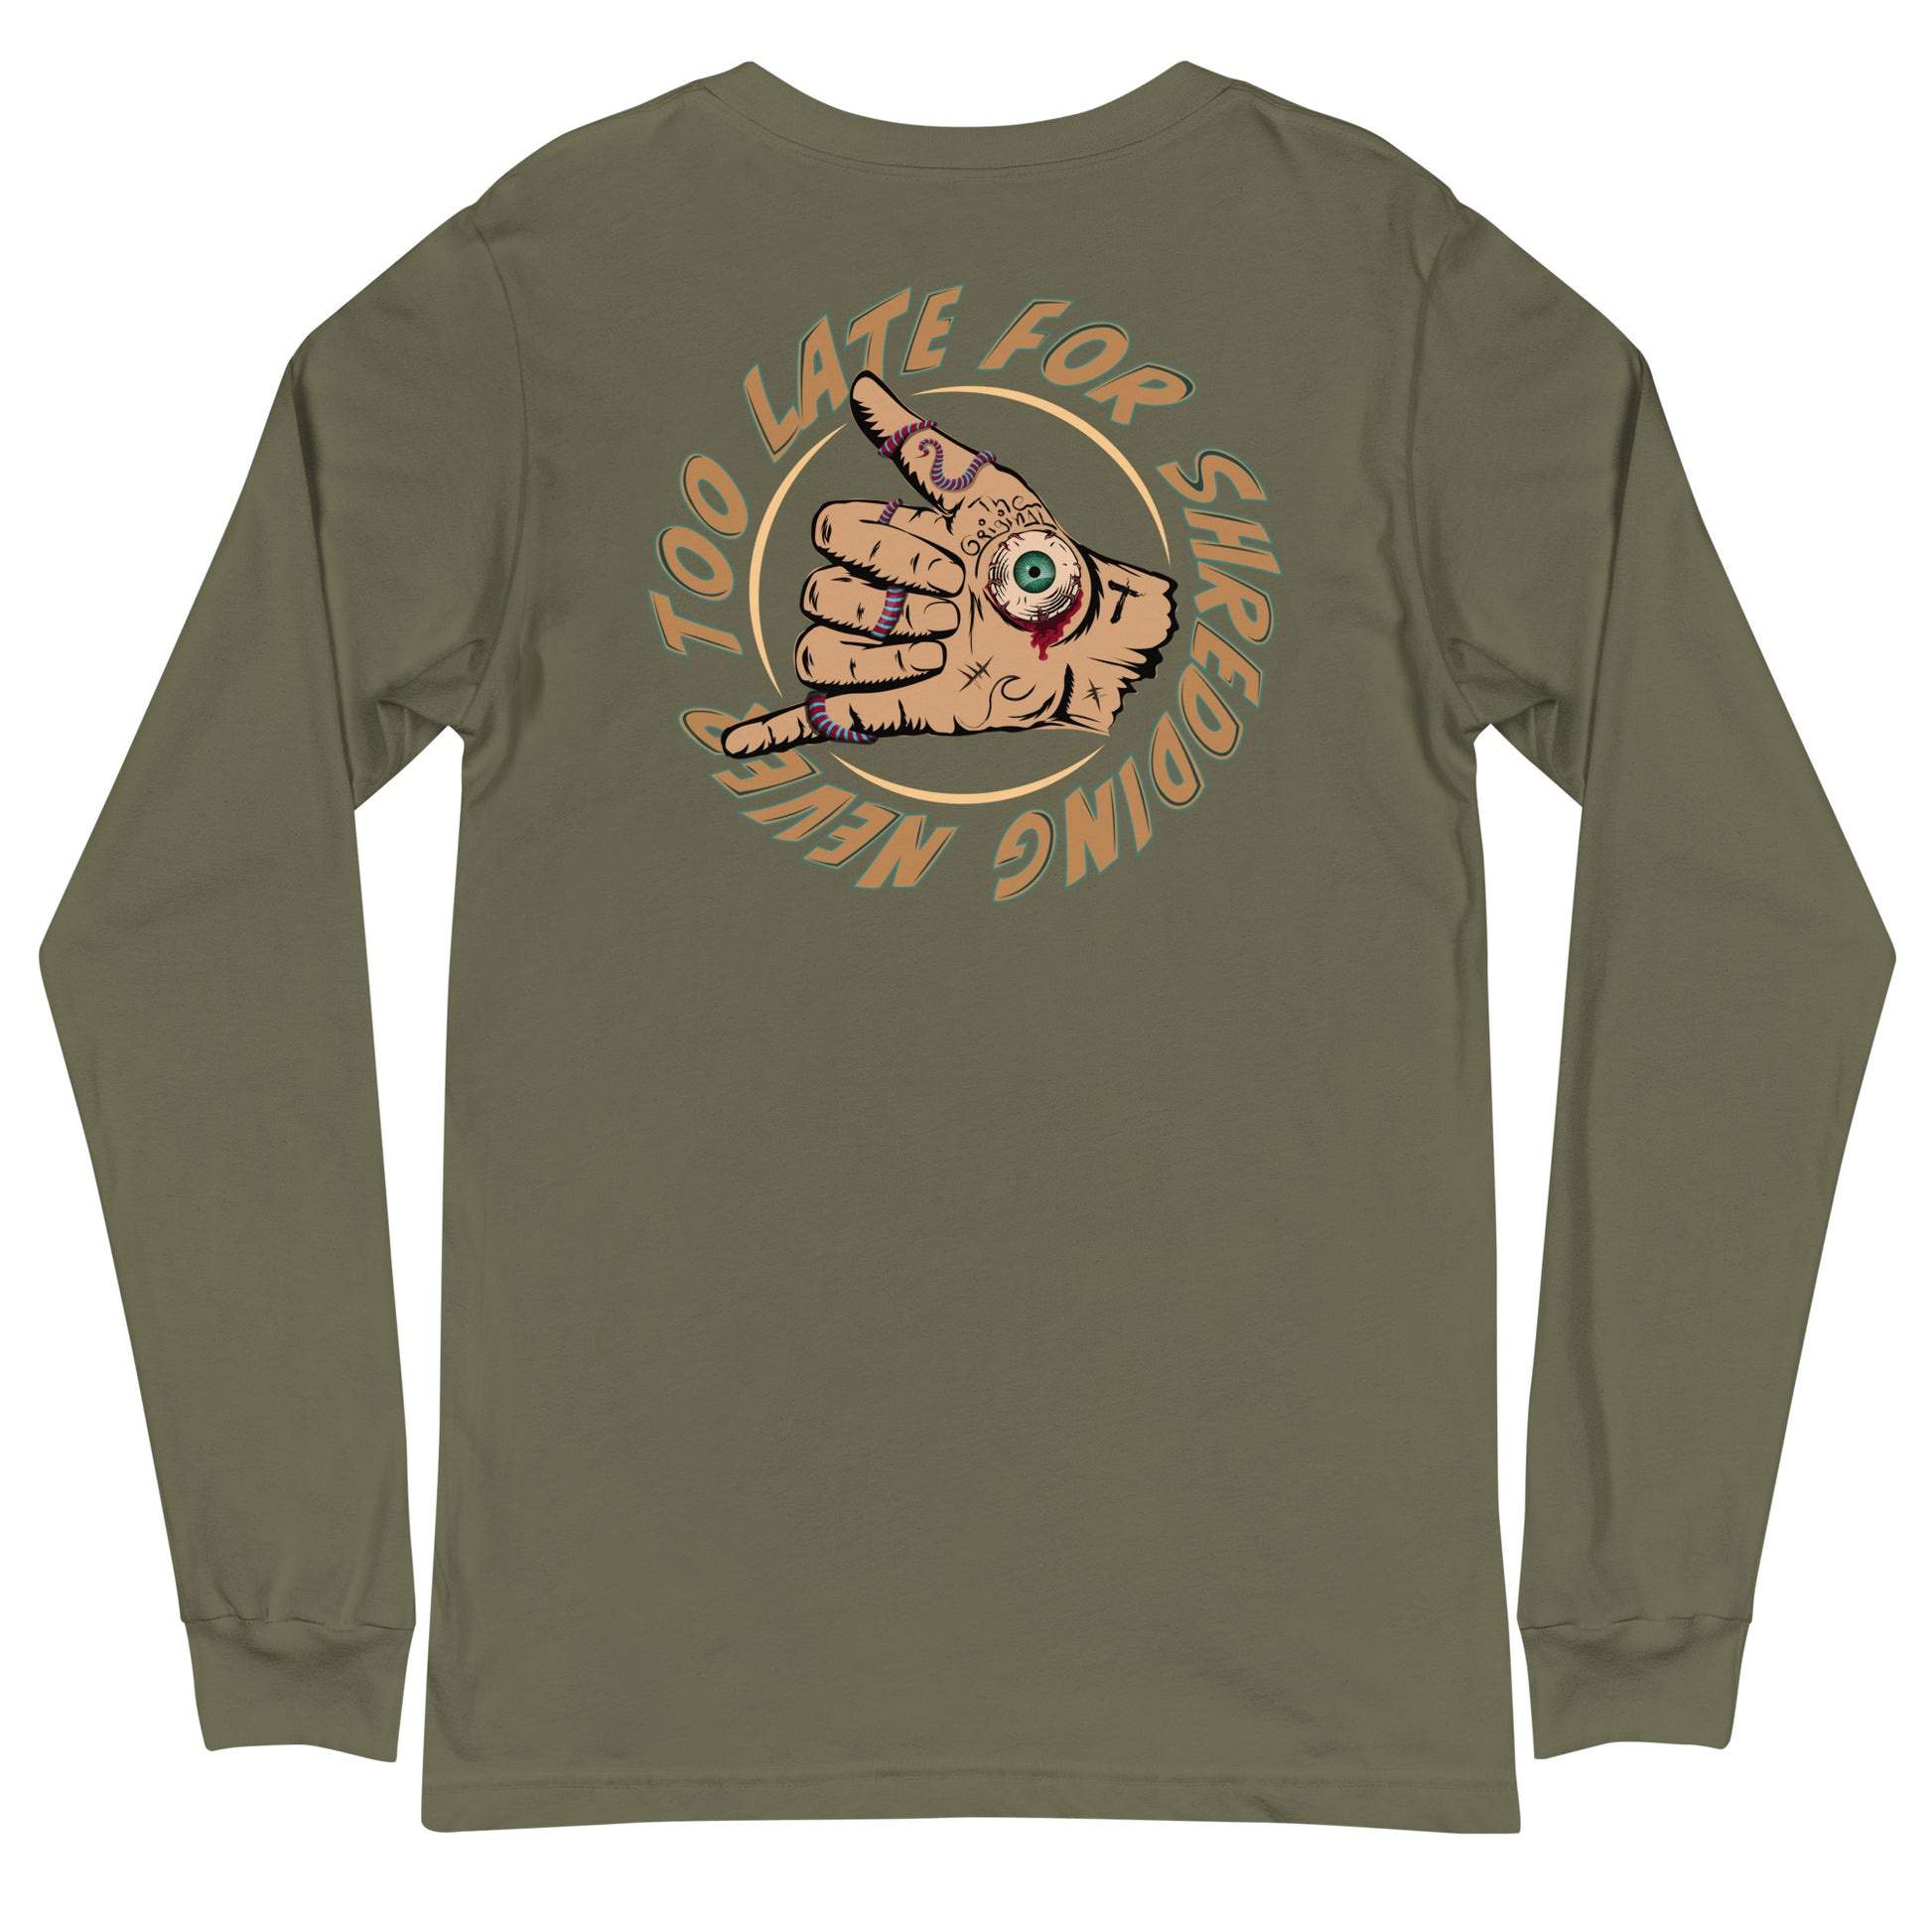 Long Sleeve surfing shaka hand Never Too Late style volcom, dos unisex couleur vert militaire